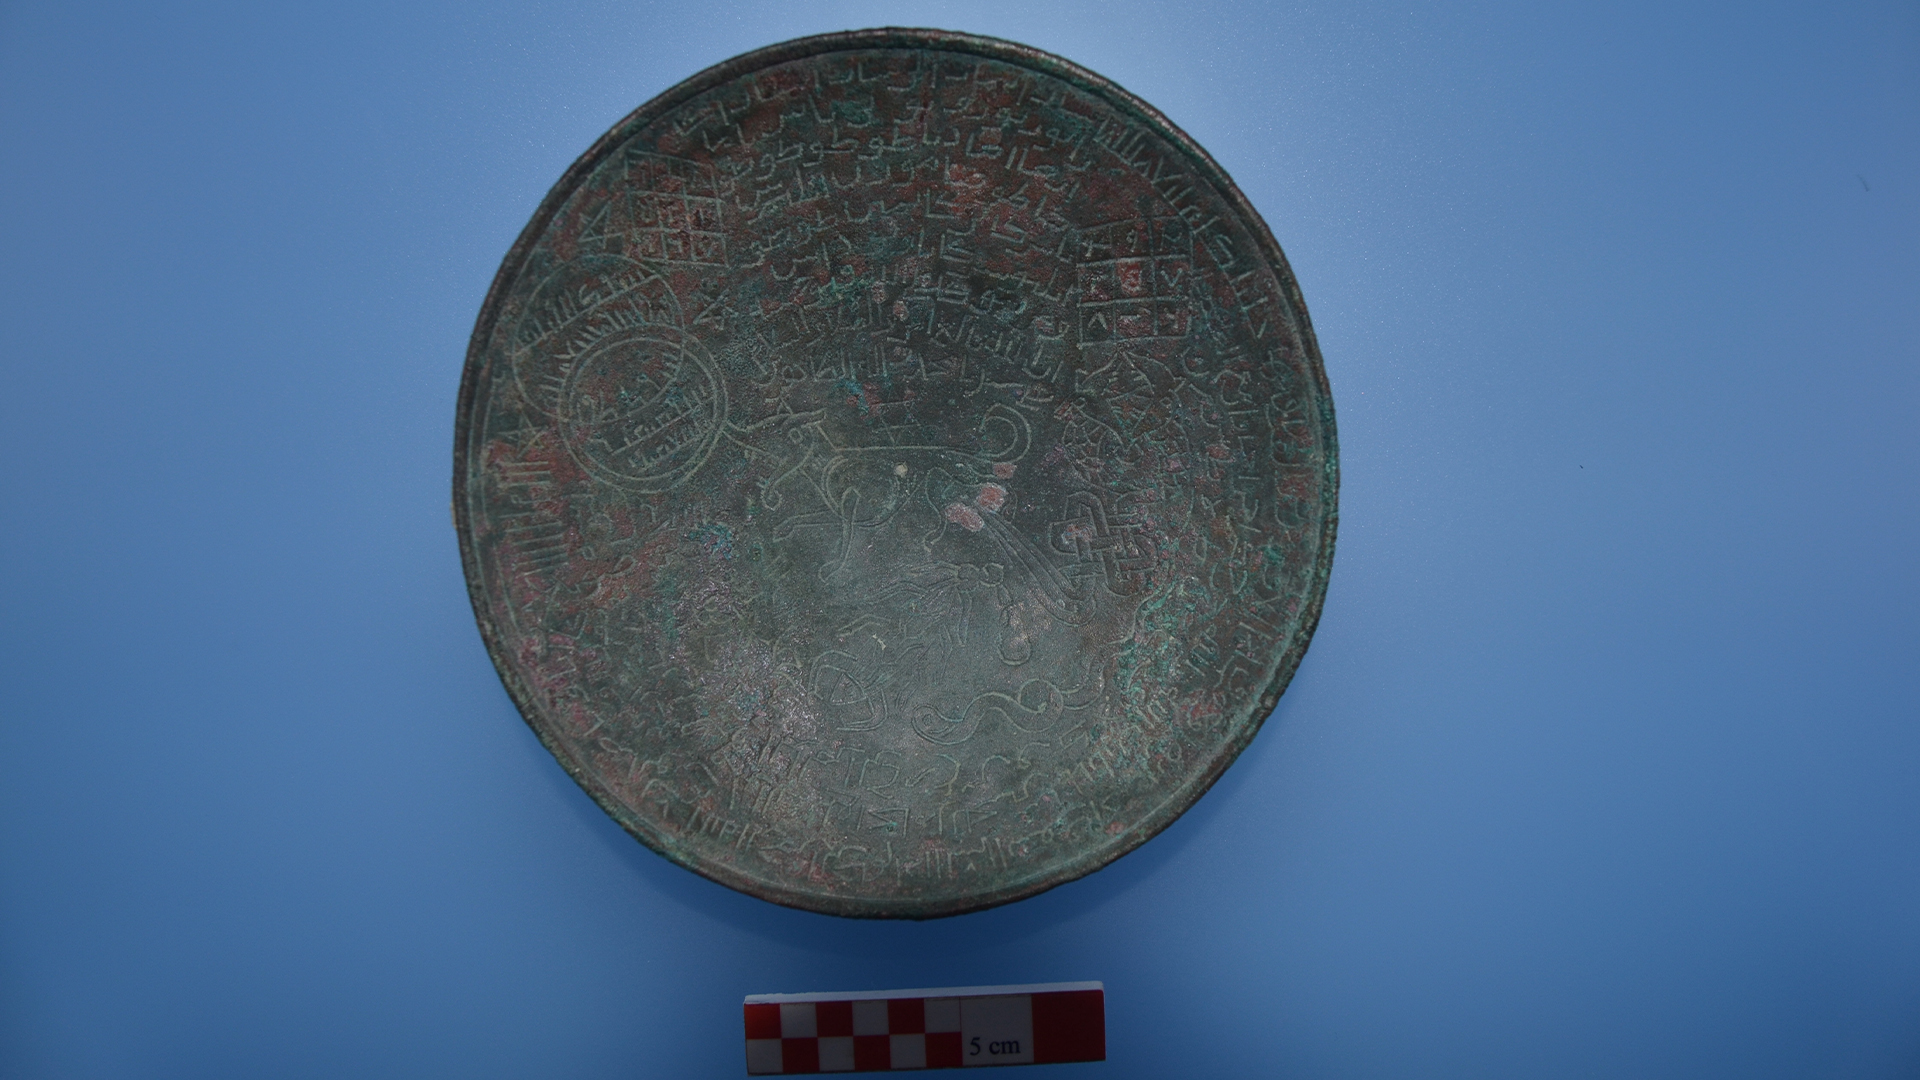 800-year-old healing bowl emblazoned with double-headed dragon unearthed in Turkish castle